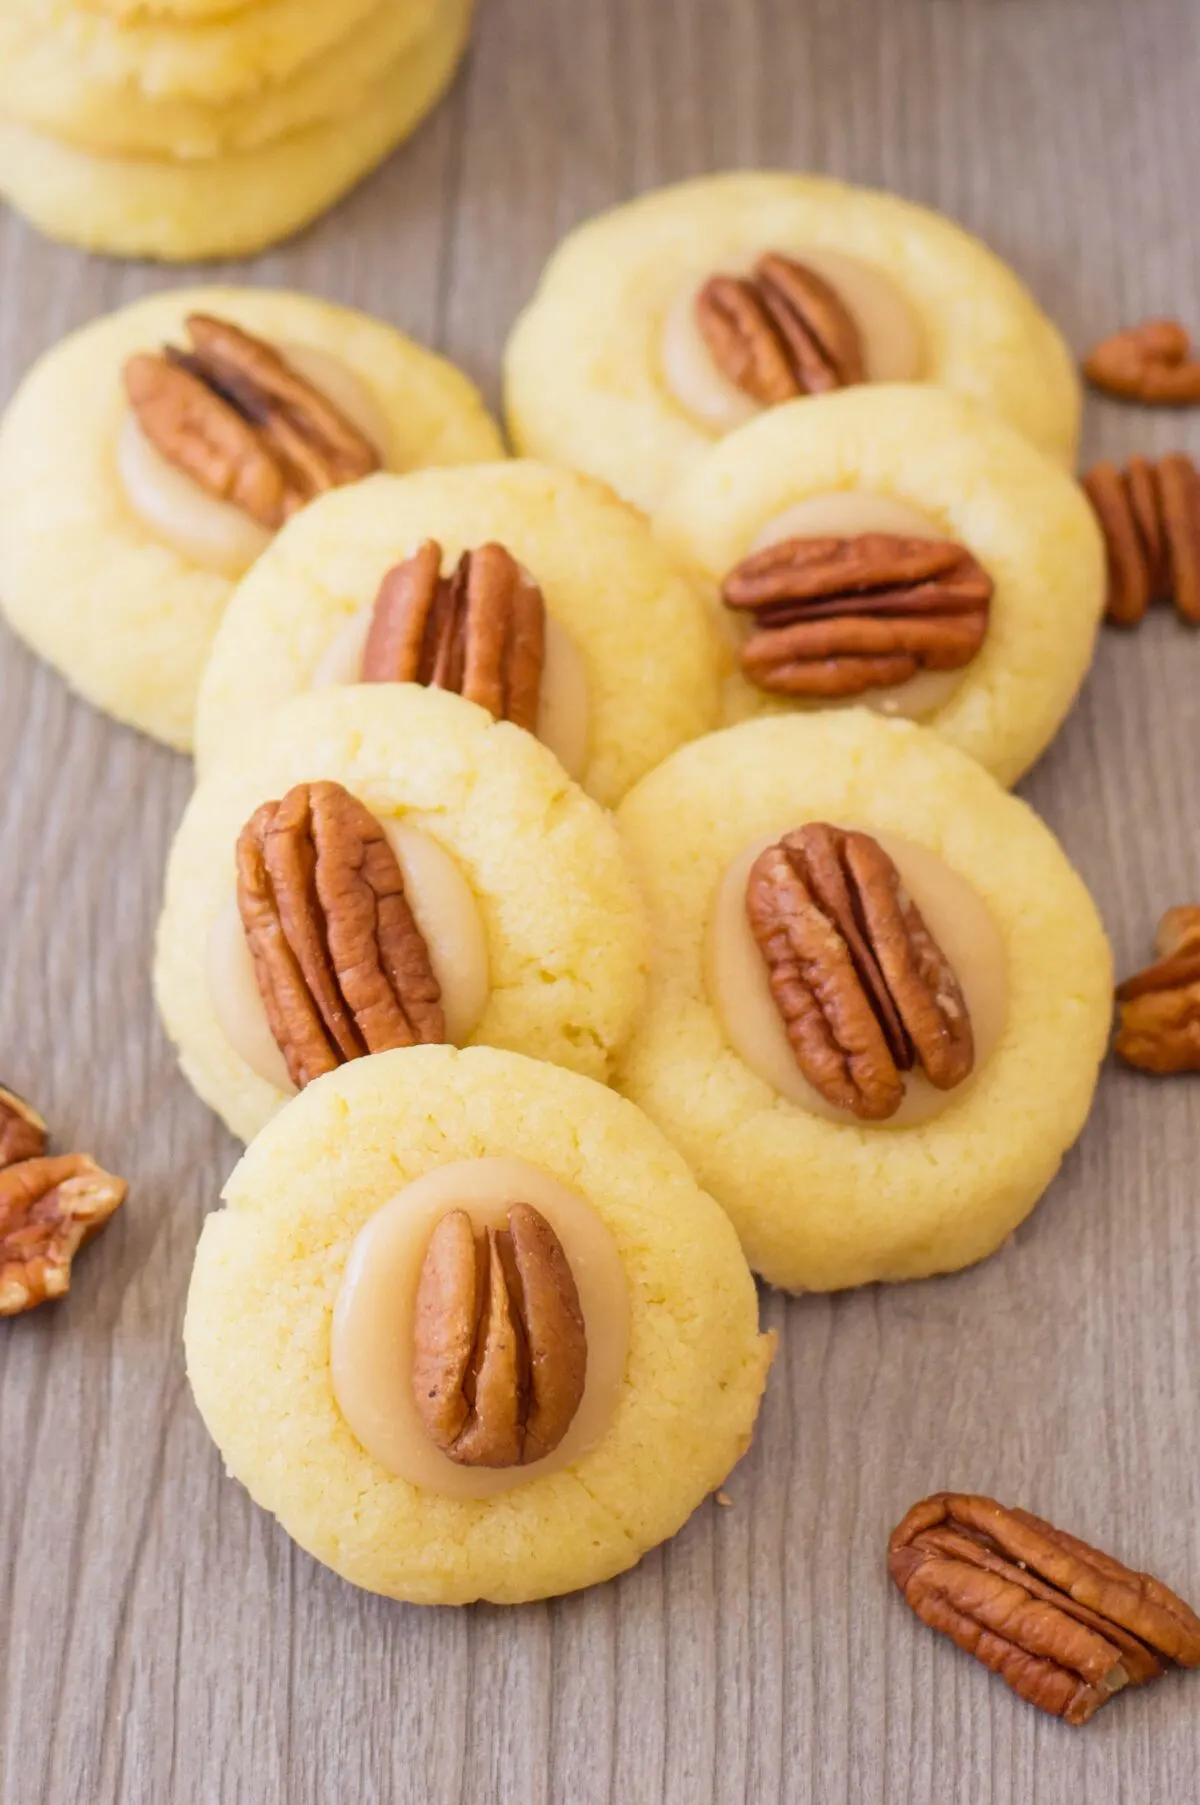 These pecan thumbprint cookies are easy to make and taste wonderful! They're perfect for holiday parties - or any day of the year, really.